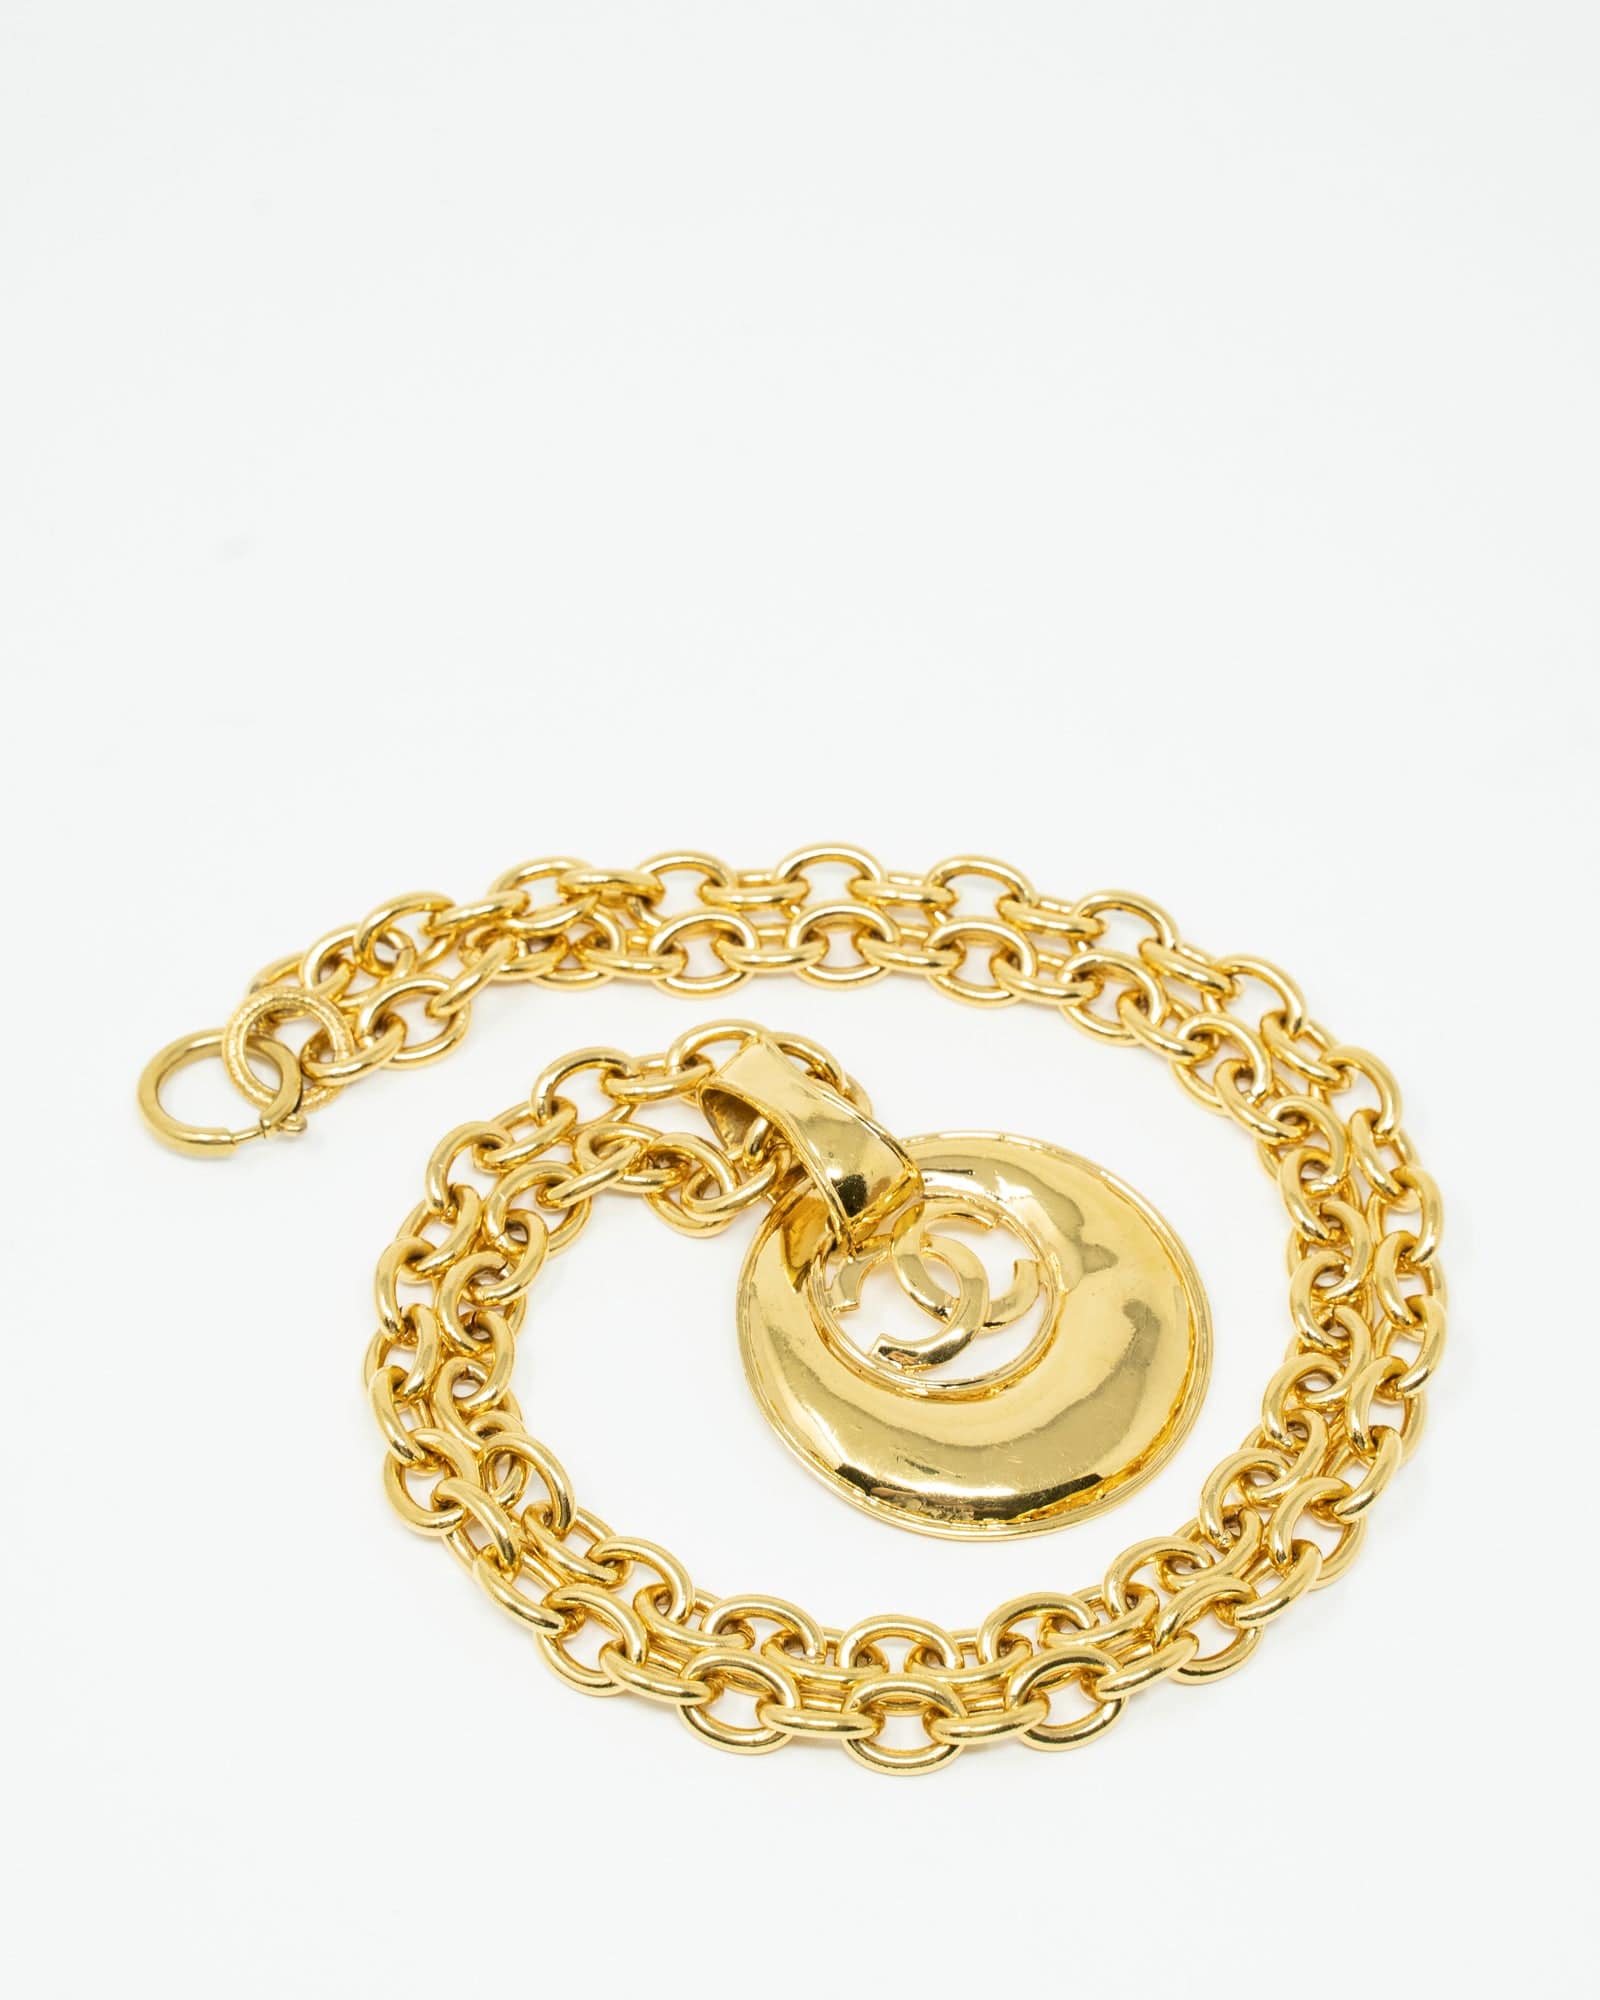 Chanel Vintage Chanel Gold Plated CC Round Charm Pendant Necklace - ASL2383